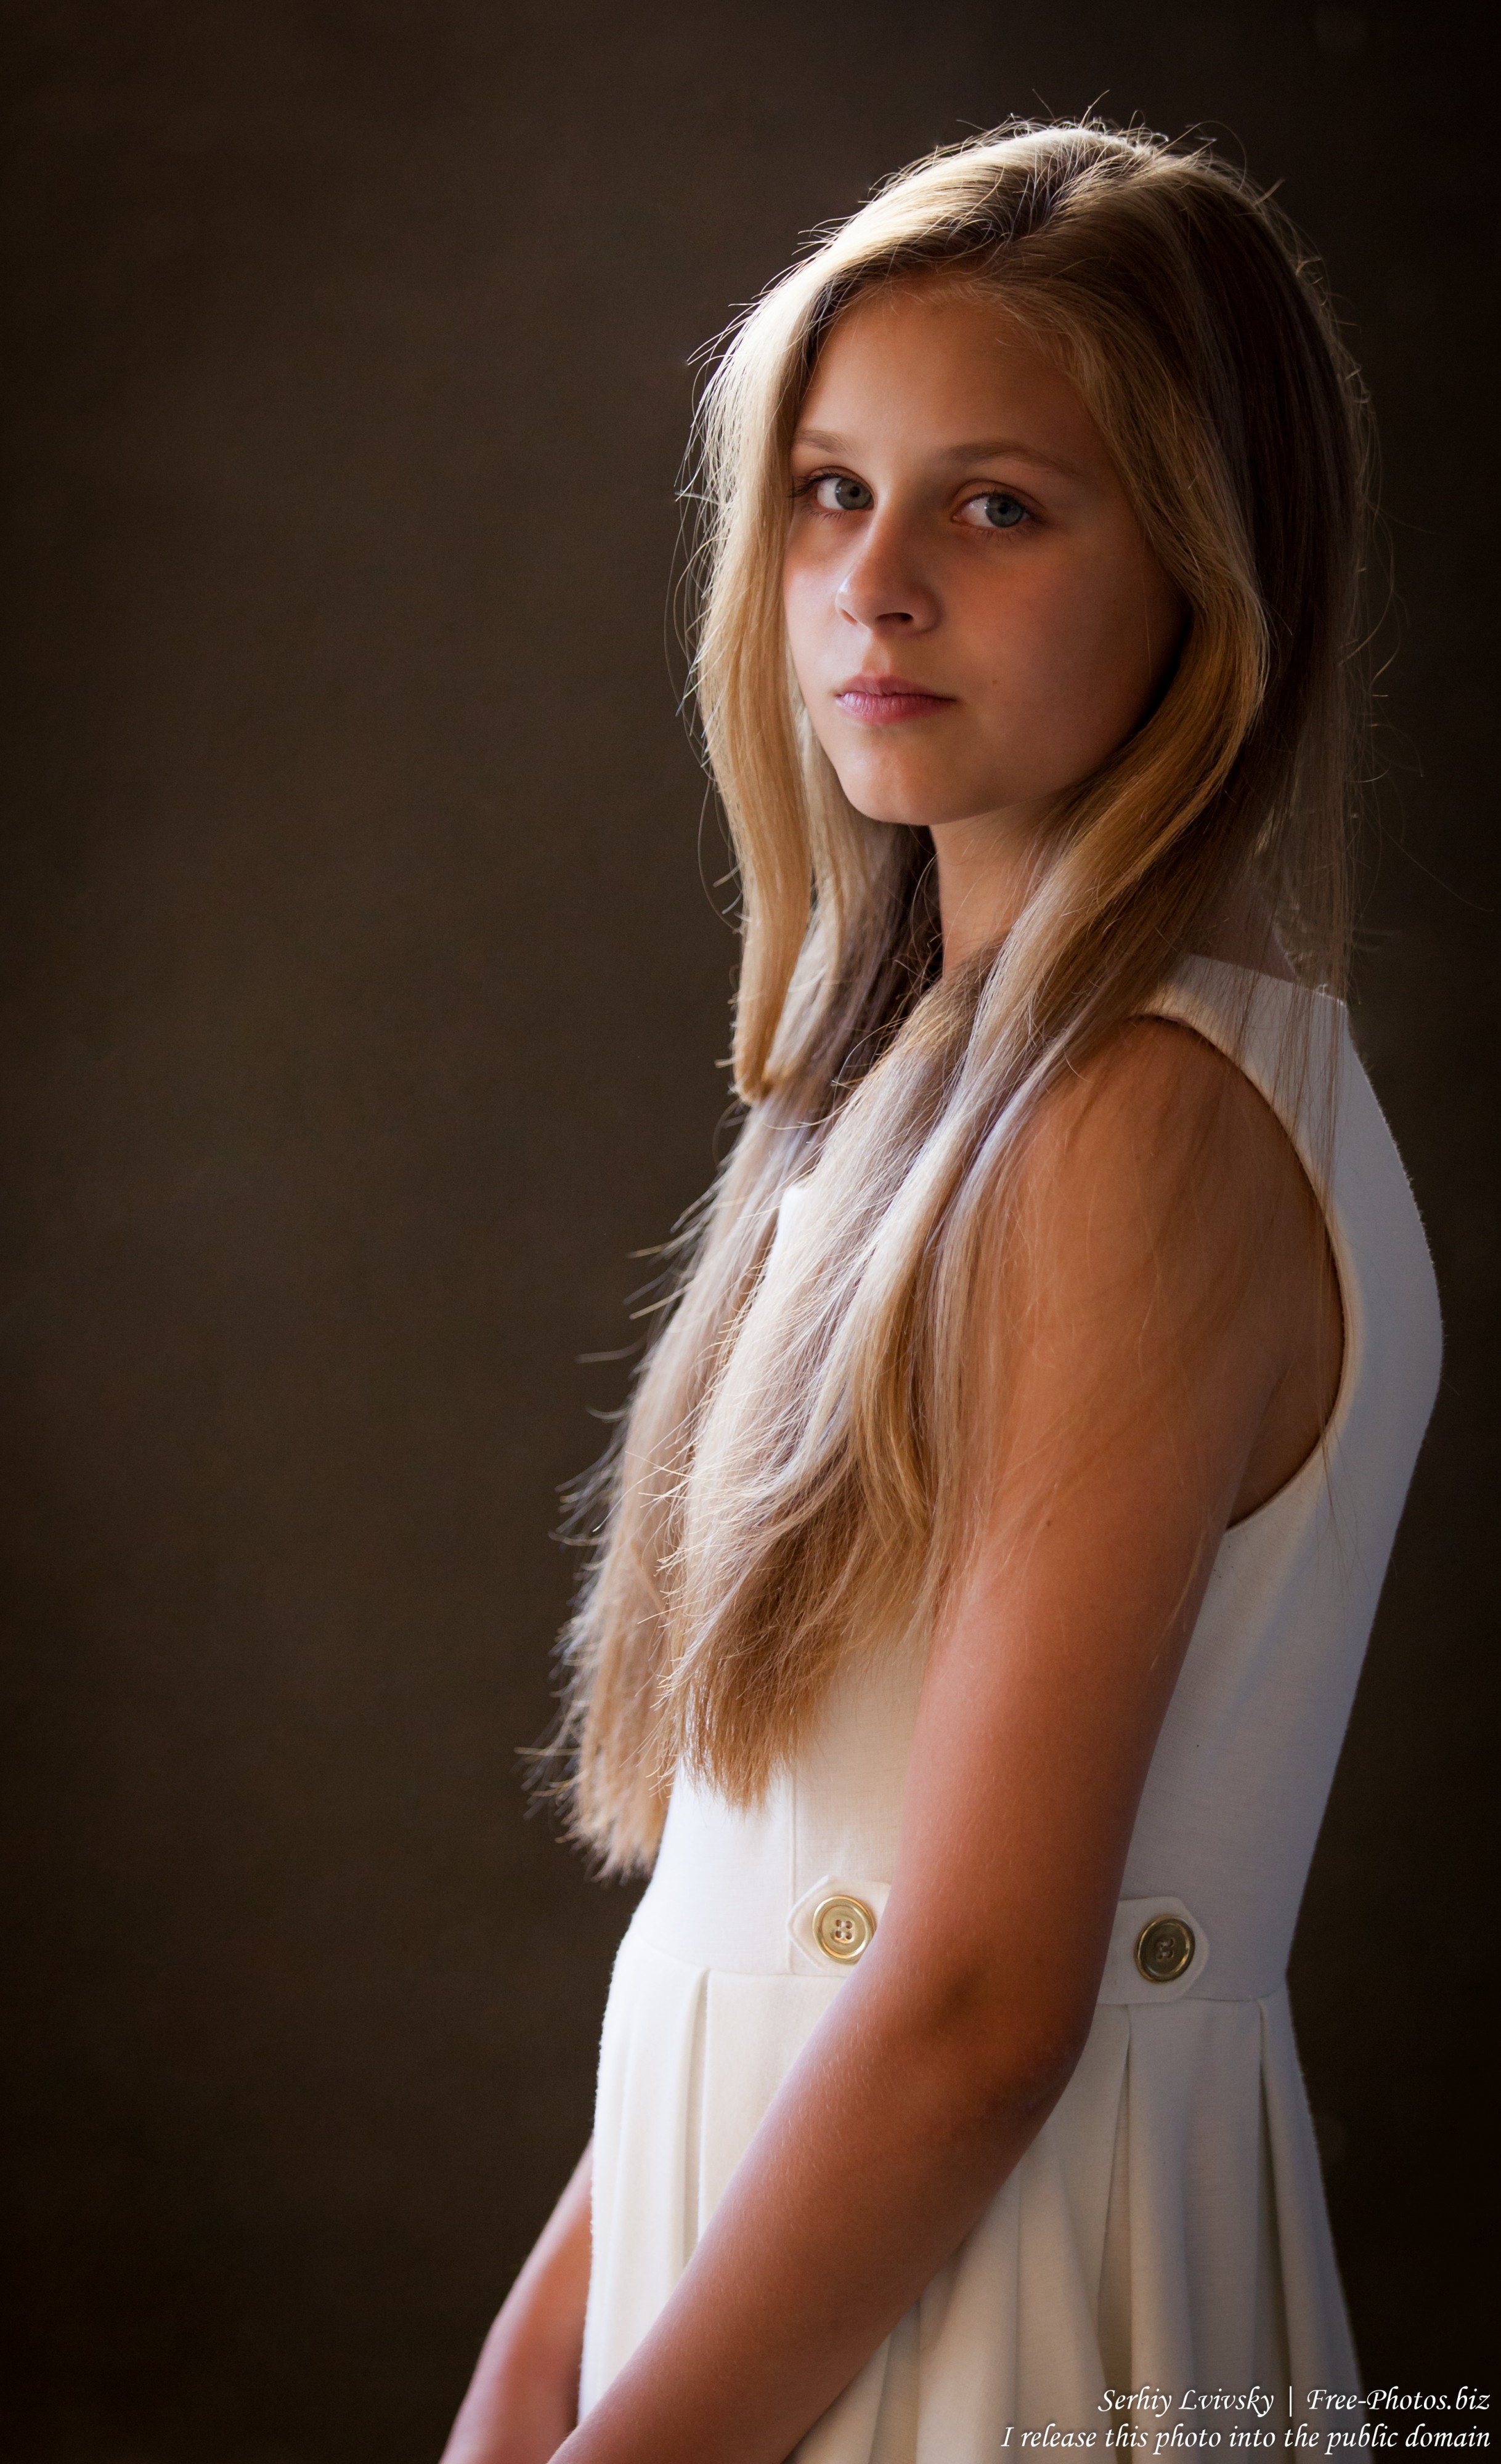 a 12-year-old blond girl wearing a white dress photographed in July 2015 by Serhiy Lvivsky, picture 4